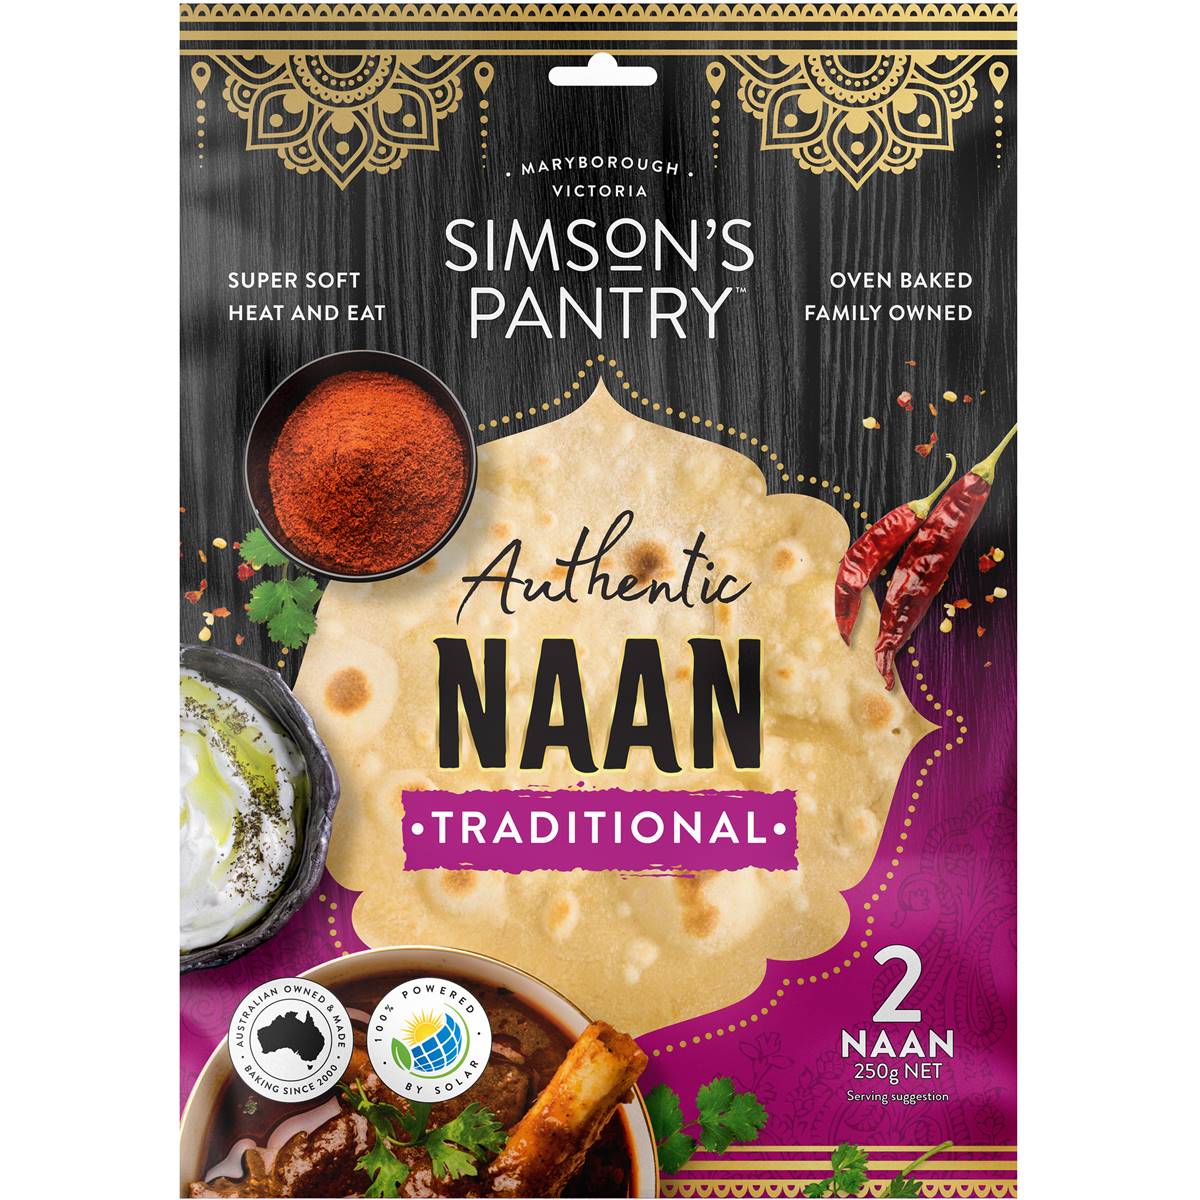 Simson's Pantry Naan Traditional 2x125g